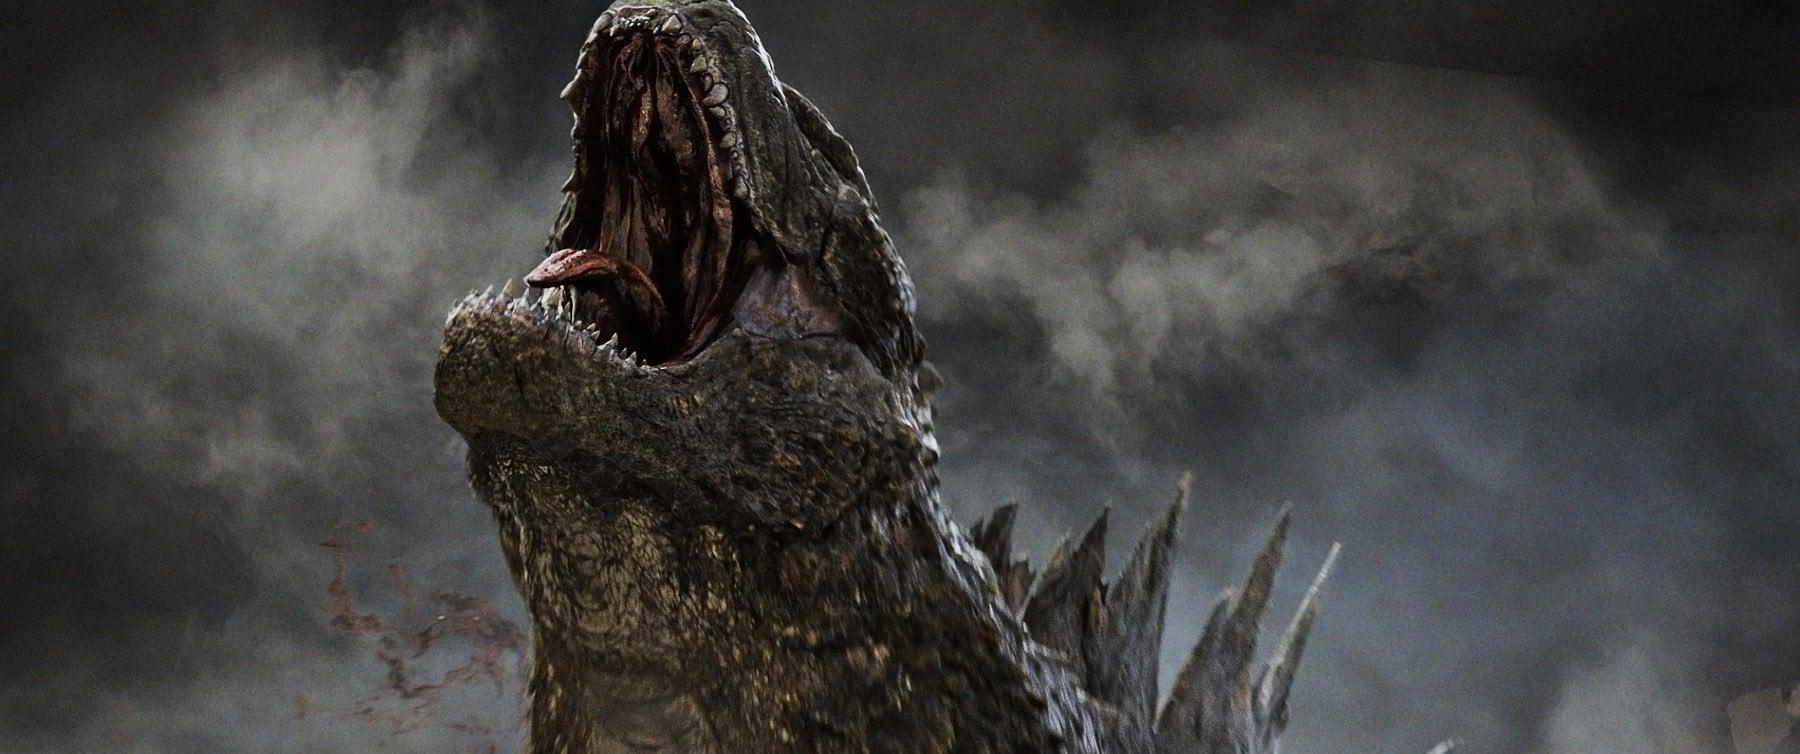 Synopsis And Cast Revealed For 'Godzilla 2'!